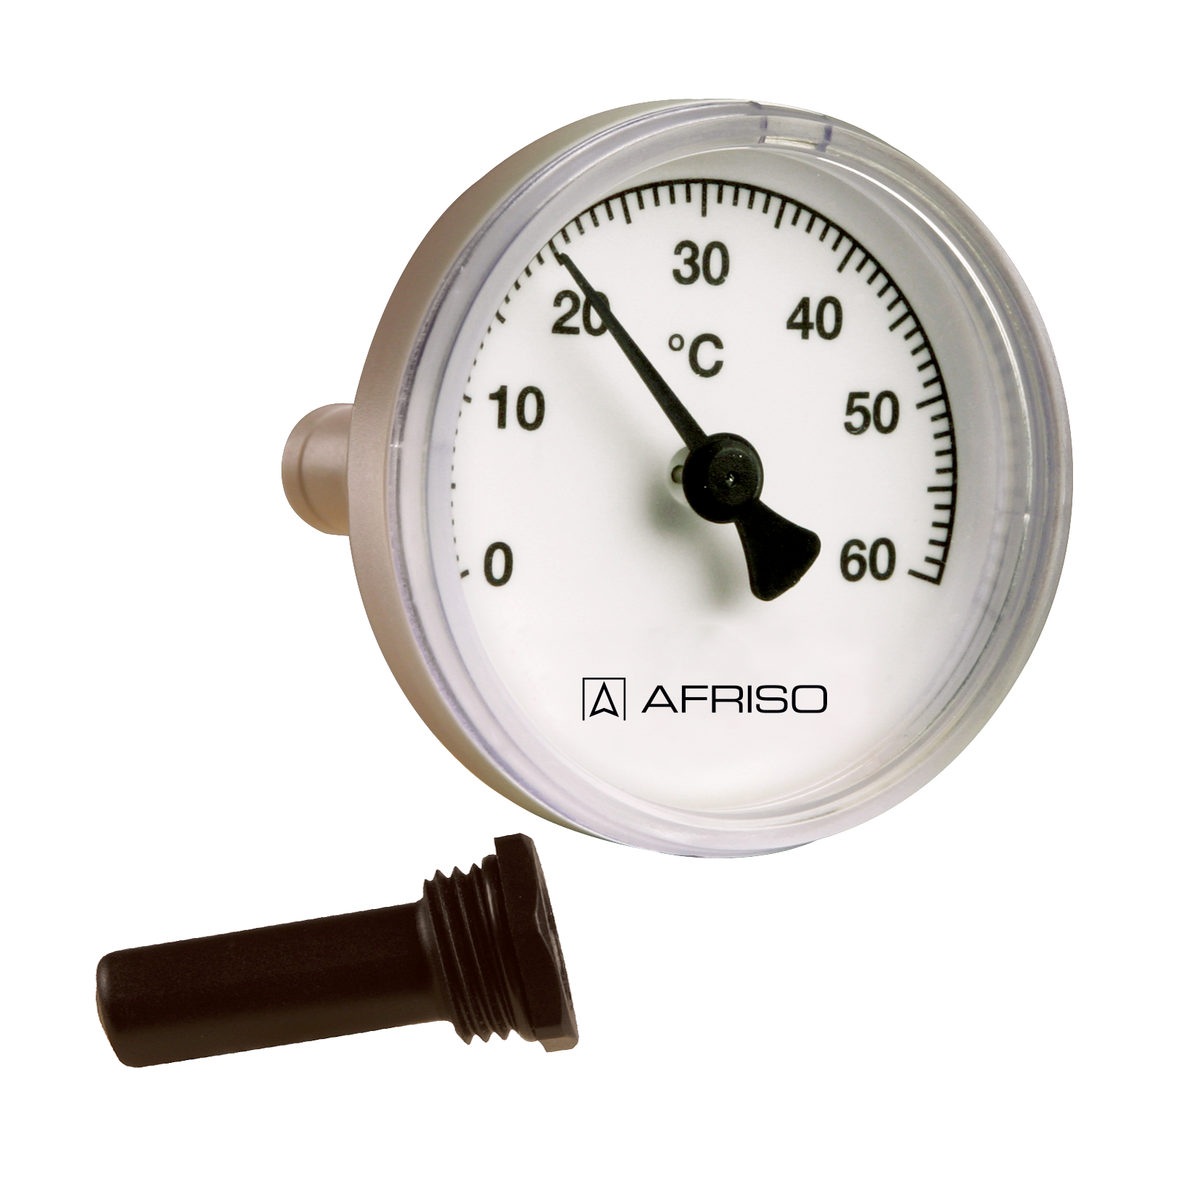 AFRISO Bimetall-Thermometer BiTh 50 K 0/60C 40mm 1/2 axial Kl.2 SAL 84780 object_image_57154_en